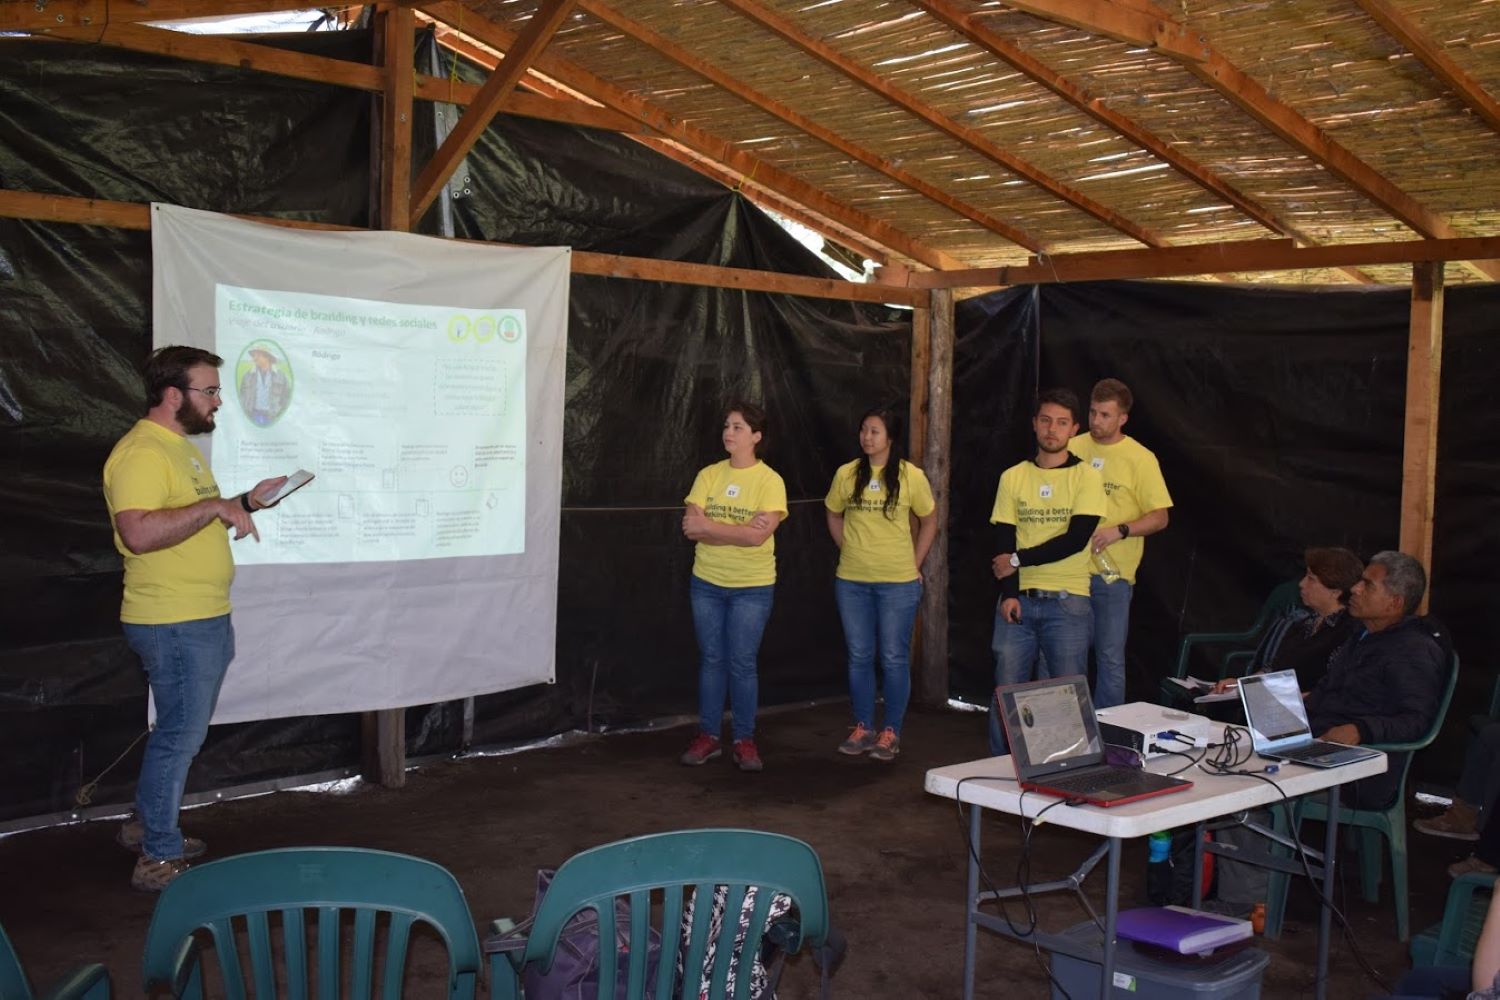 EY Employees doing a presentation